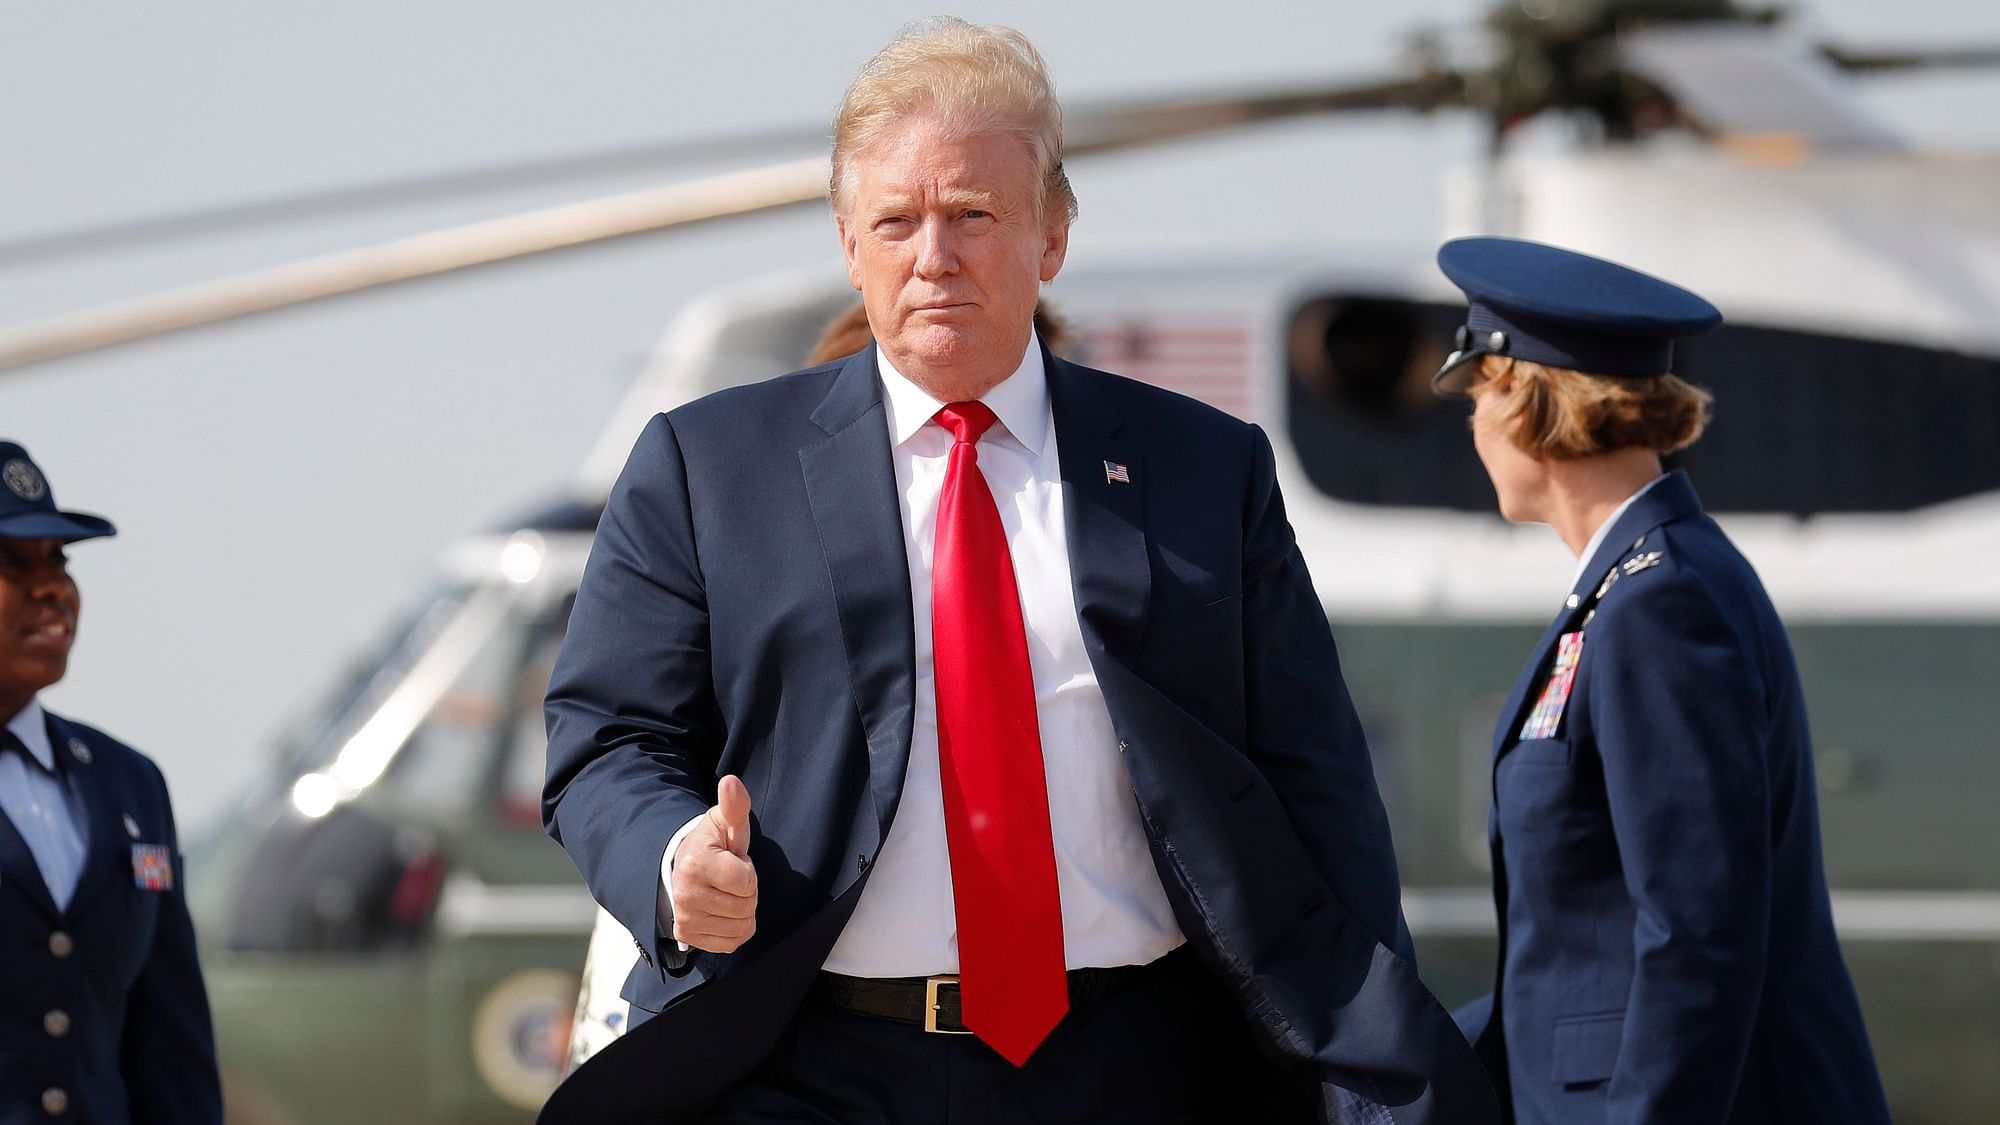 President Donald Trump gives a ‘thumbs-up’ as he prepares to board Air Force One, Thursday, 18 April, 2019, at Andrews Air Force Base.